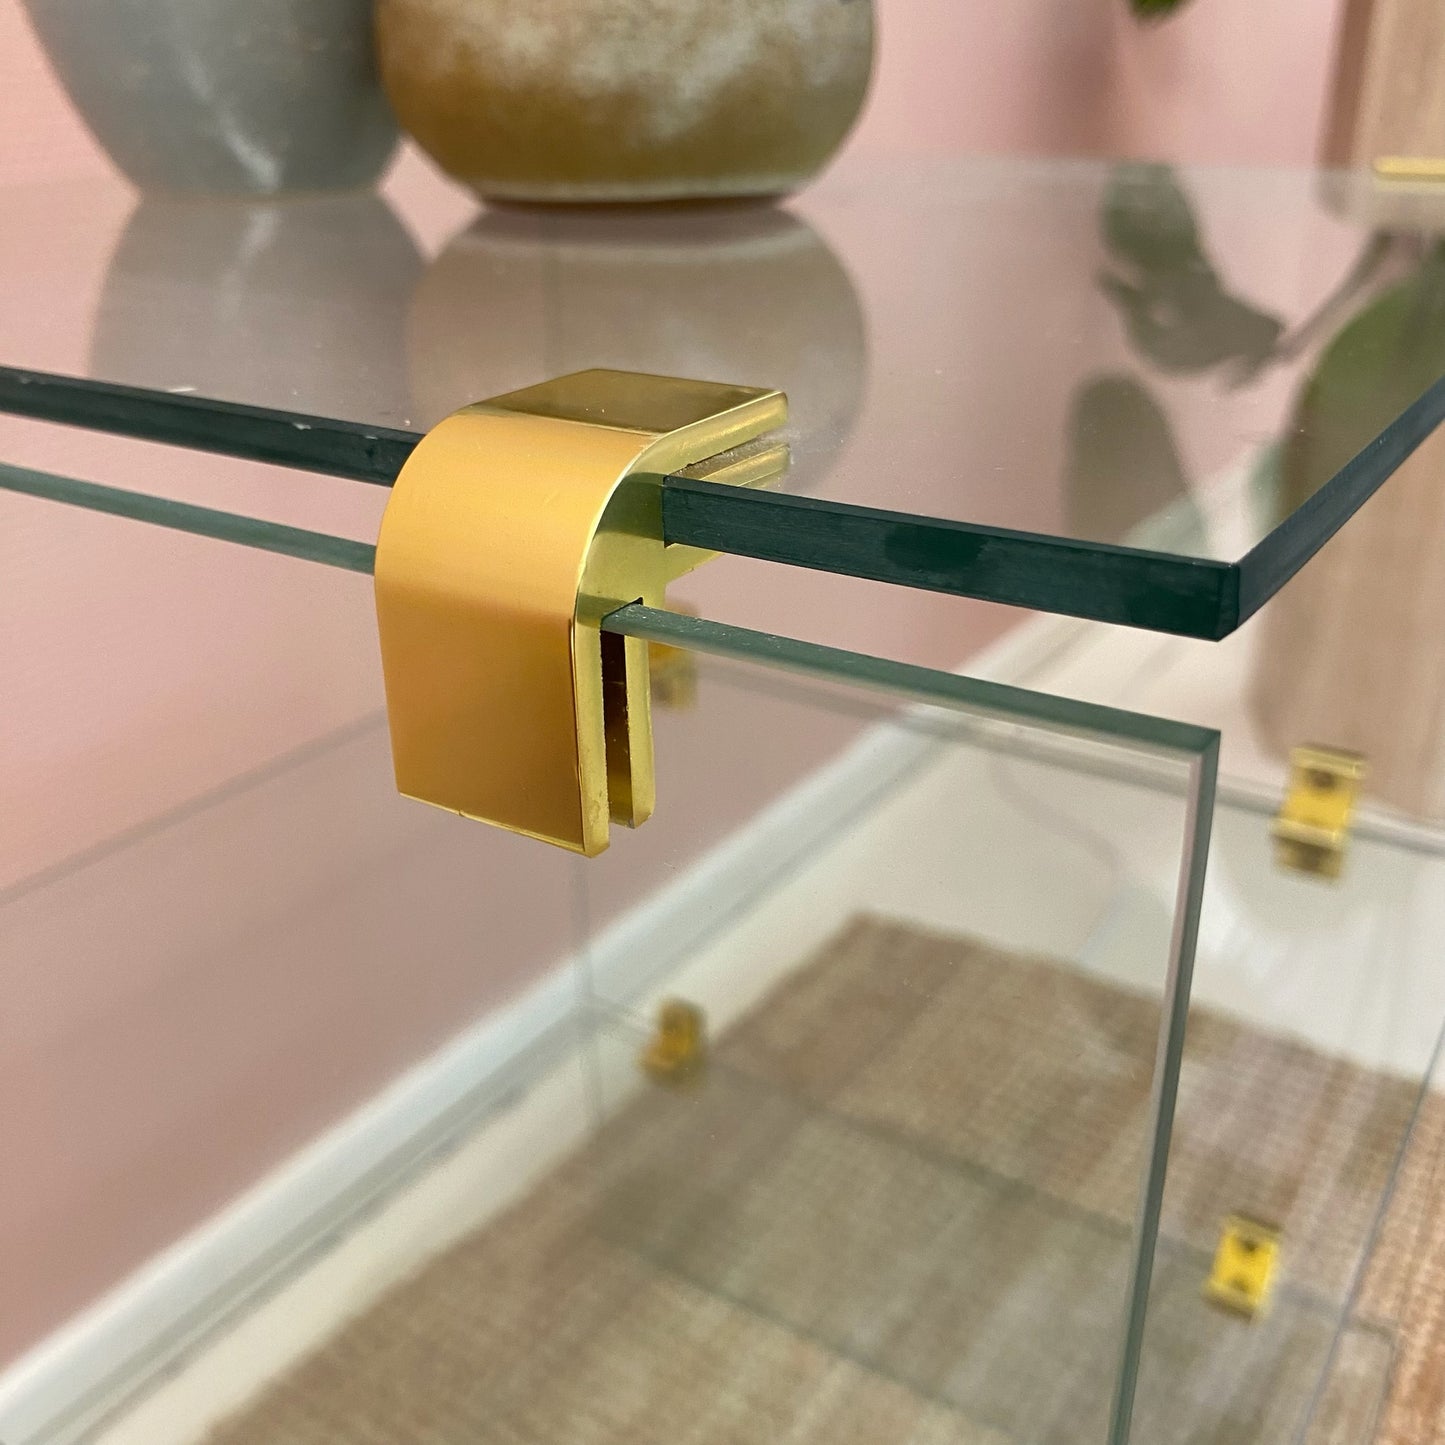 3 tier glass side table with gold details